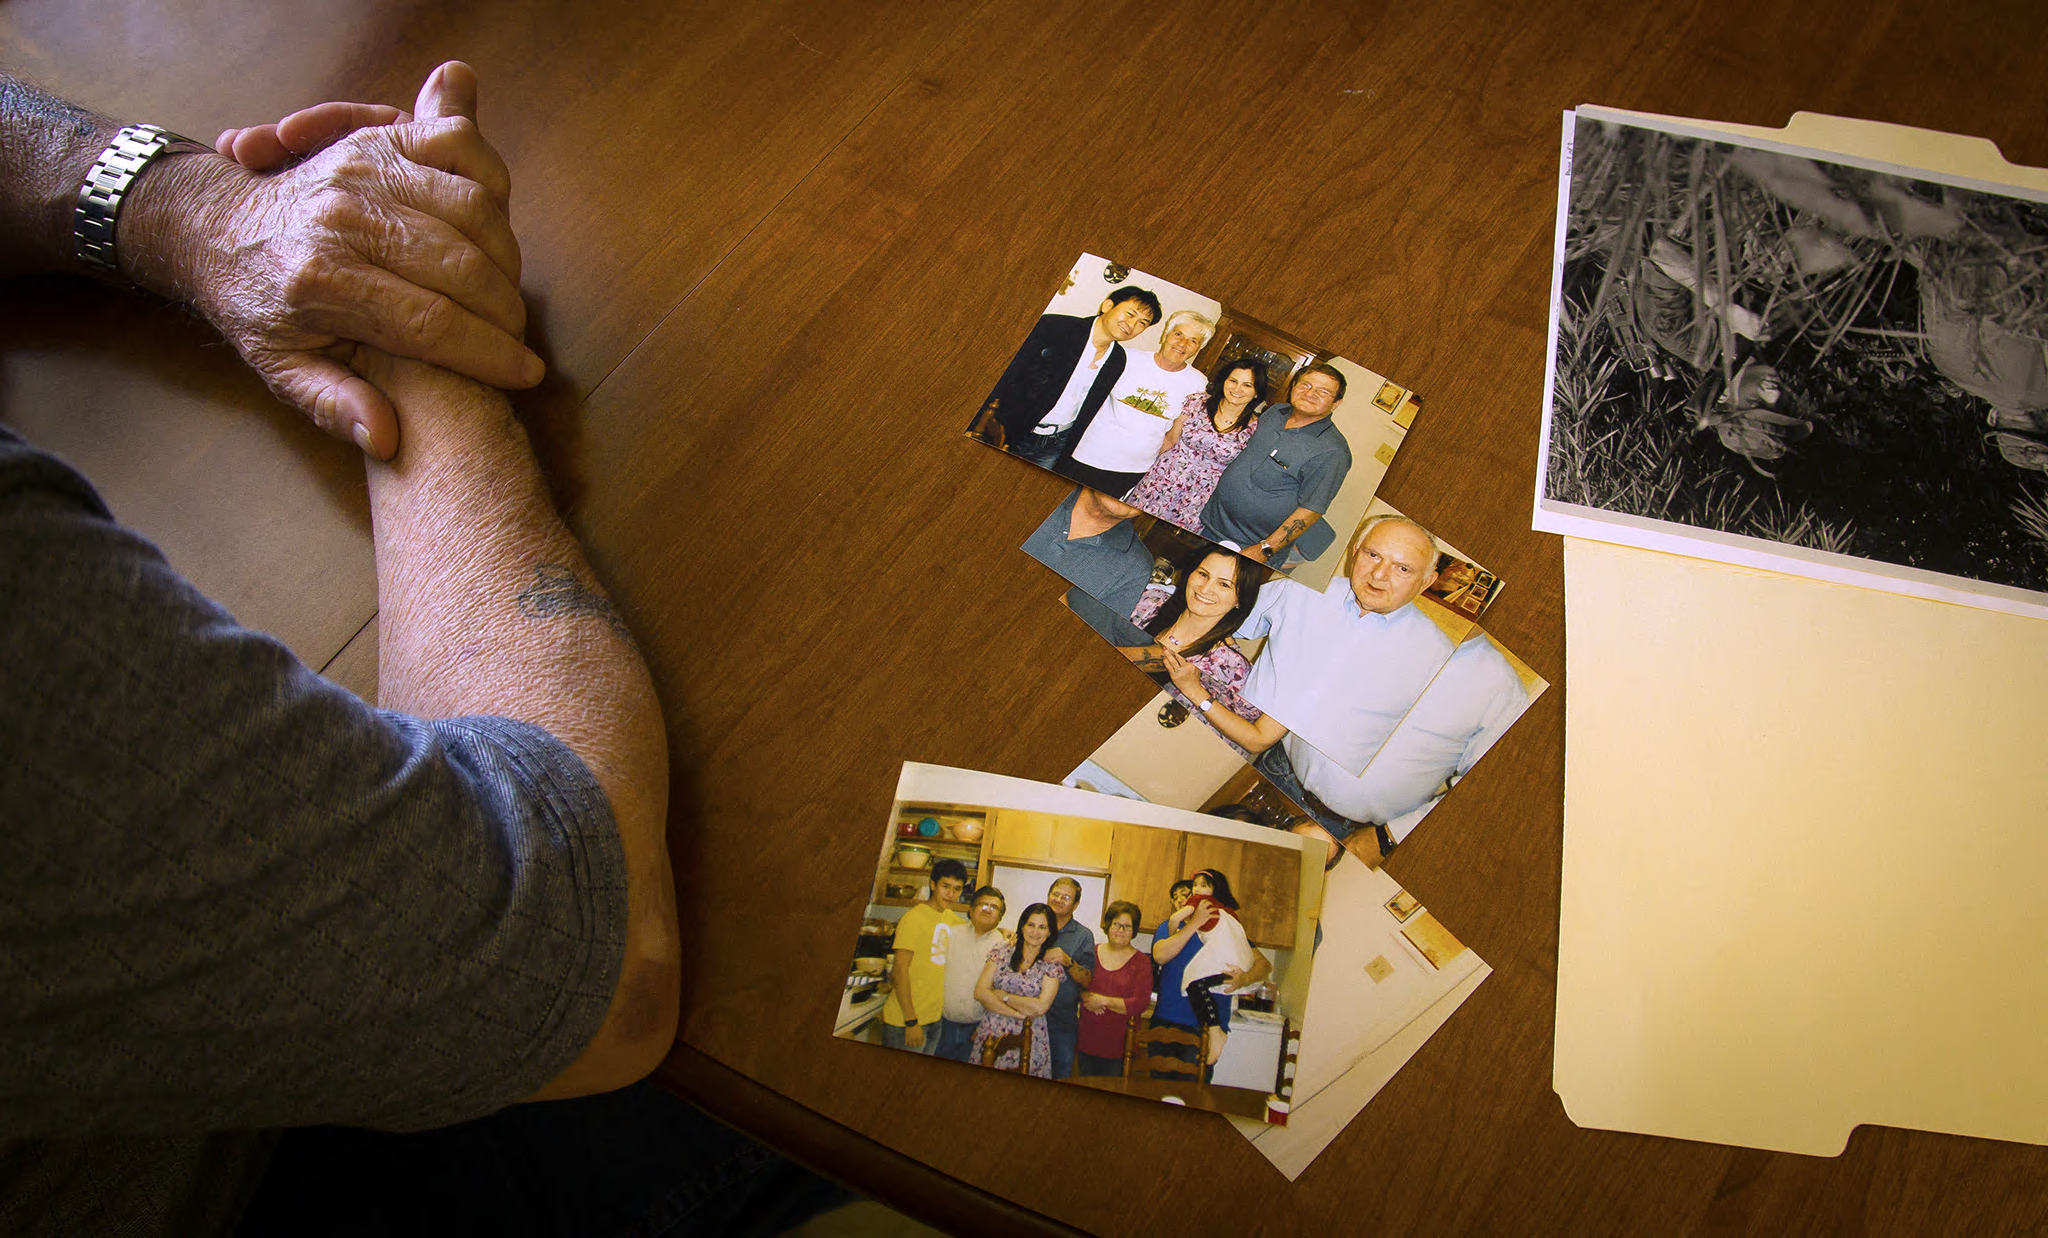 James Copeland, an American veteran who found a daughter, Tiffany Nguyen, born in Vietnam after he left, with photos of them together, in Corinth, Mississippi. August 15, 2013. (Lance Murphey/The New York Times)